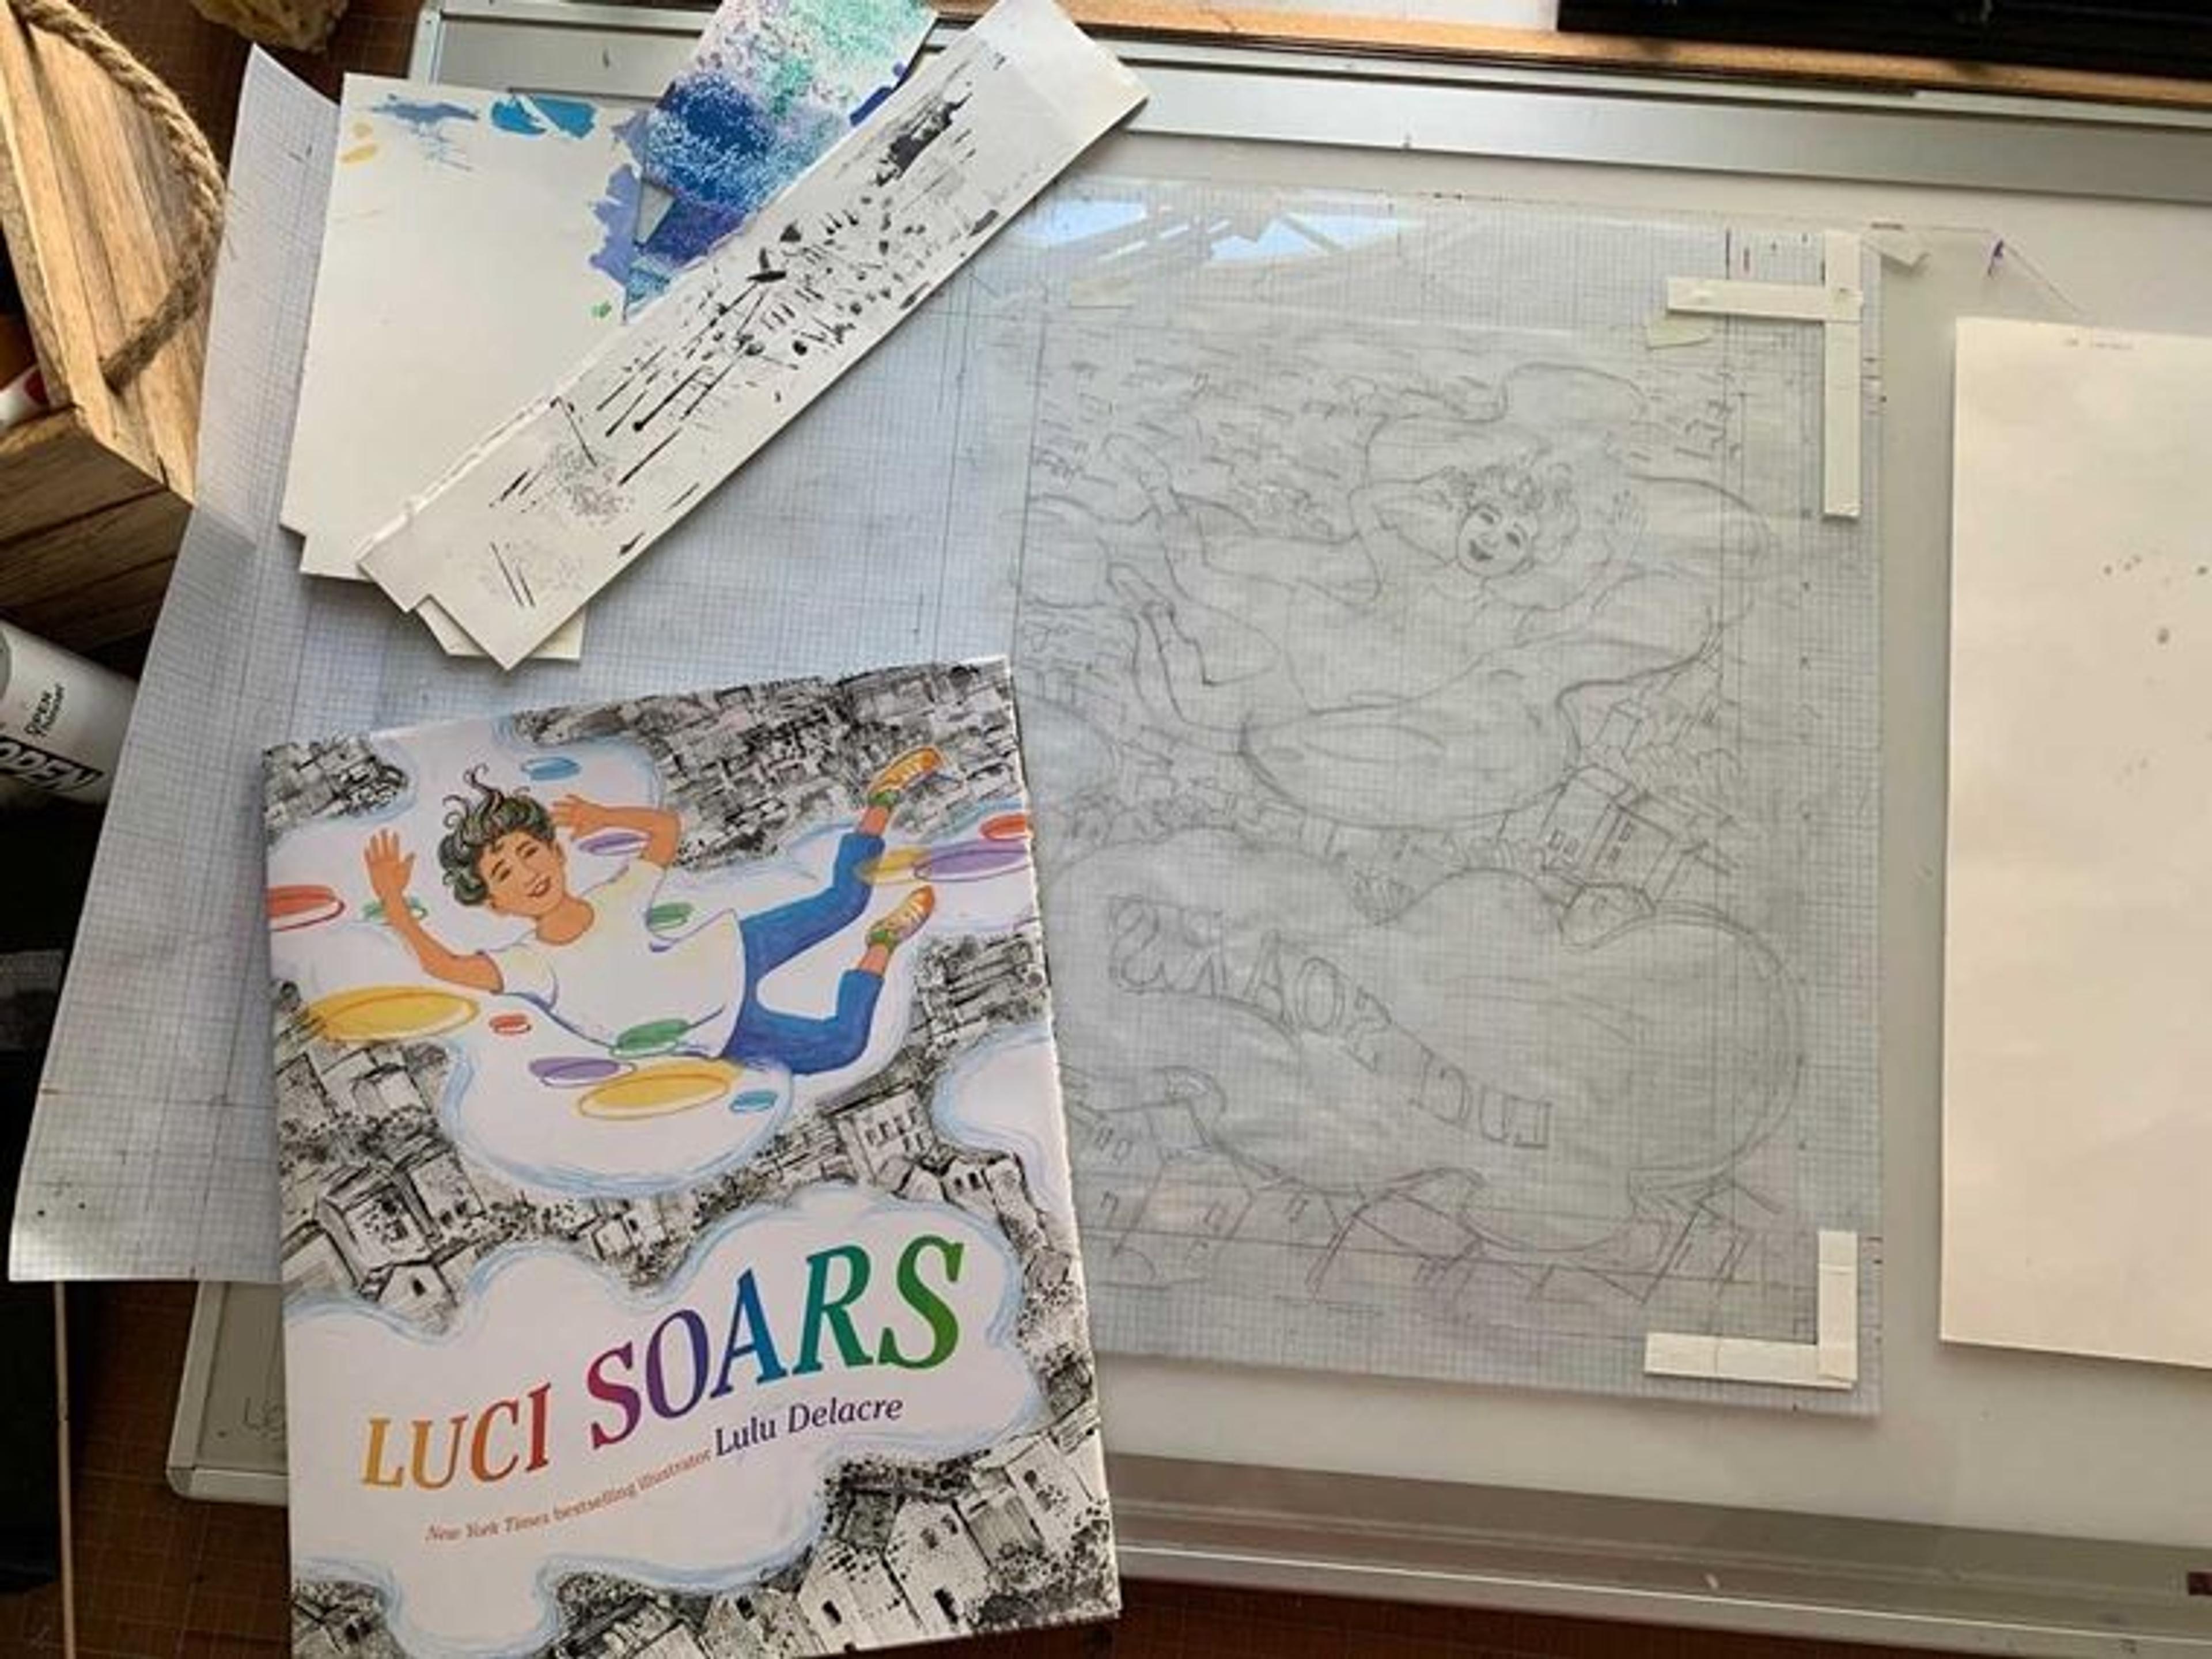 On top of a work bench, a copy of the book Luci Soars is placed atop a rough pencil sketch on tracing paper. The pencil sketch is the mirror image of the book cover.